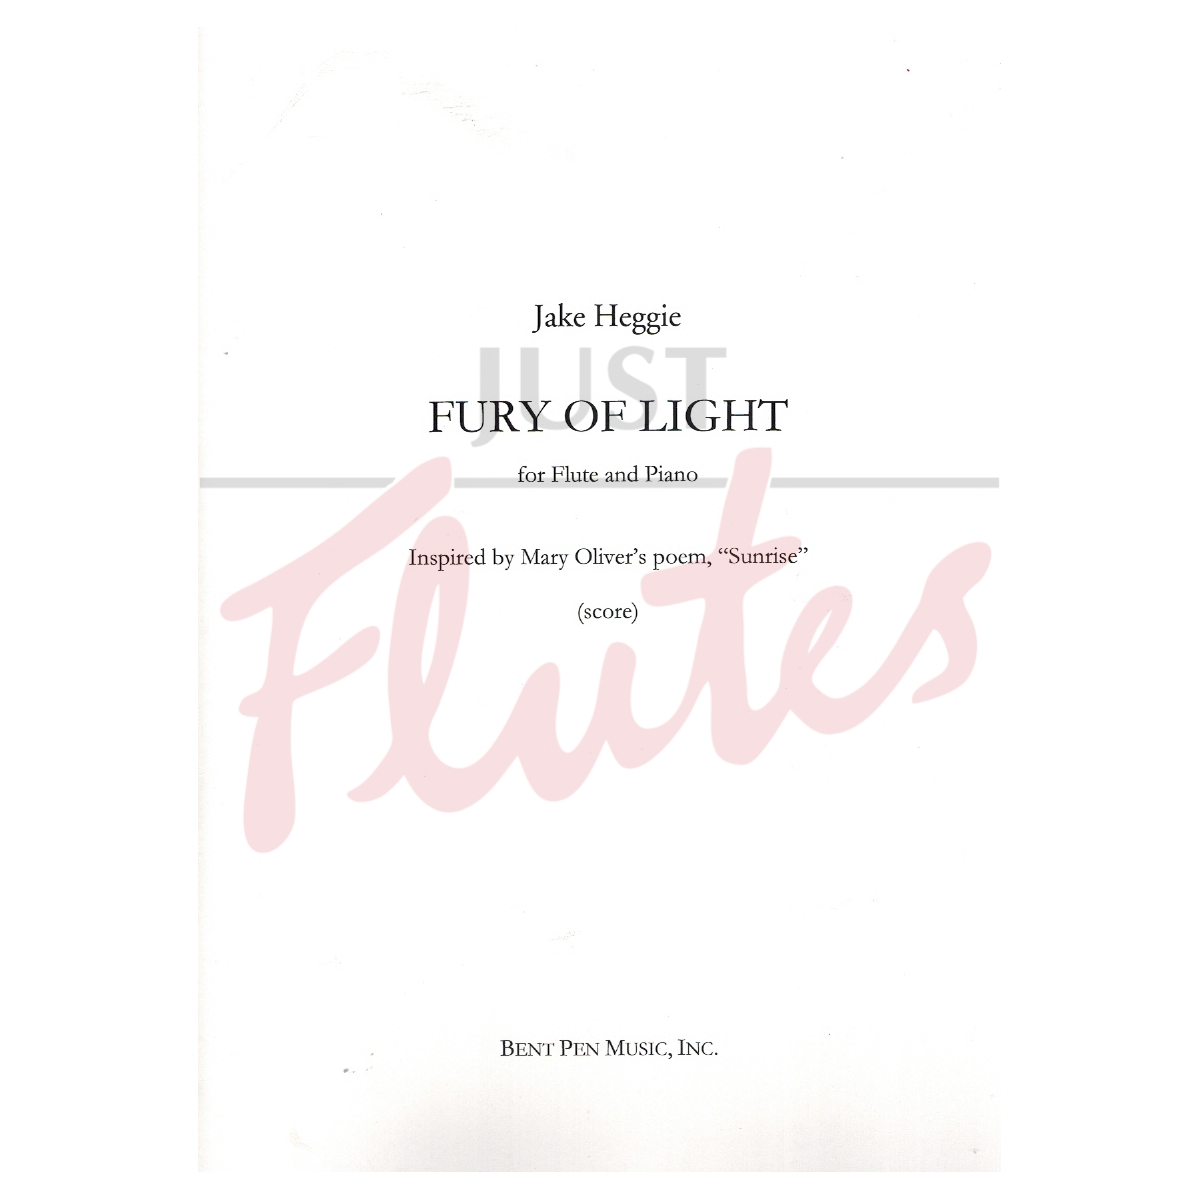 Fury of Light for Flute and Piano